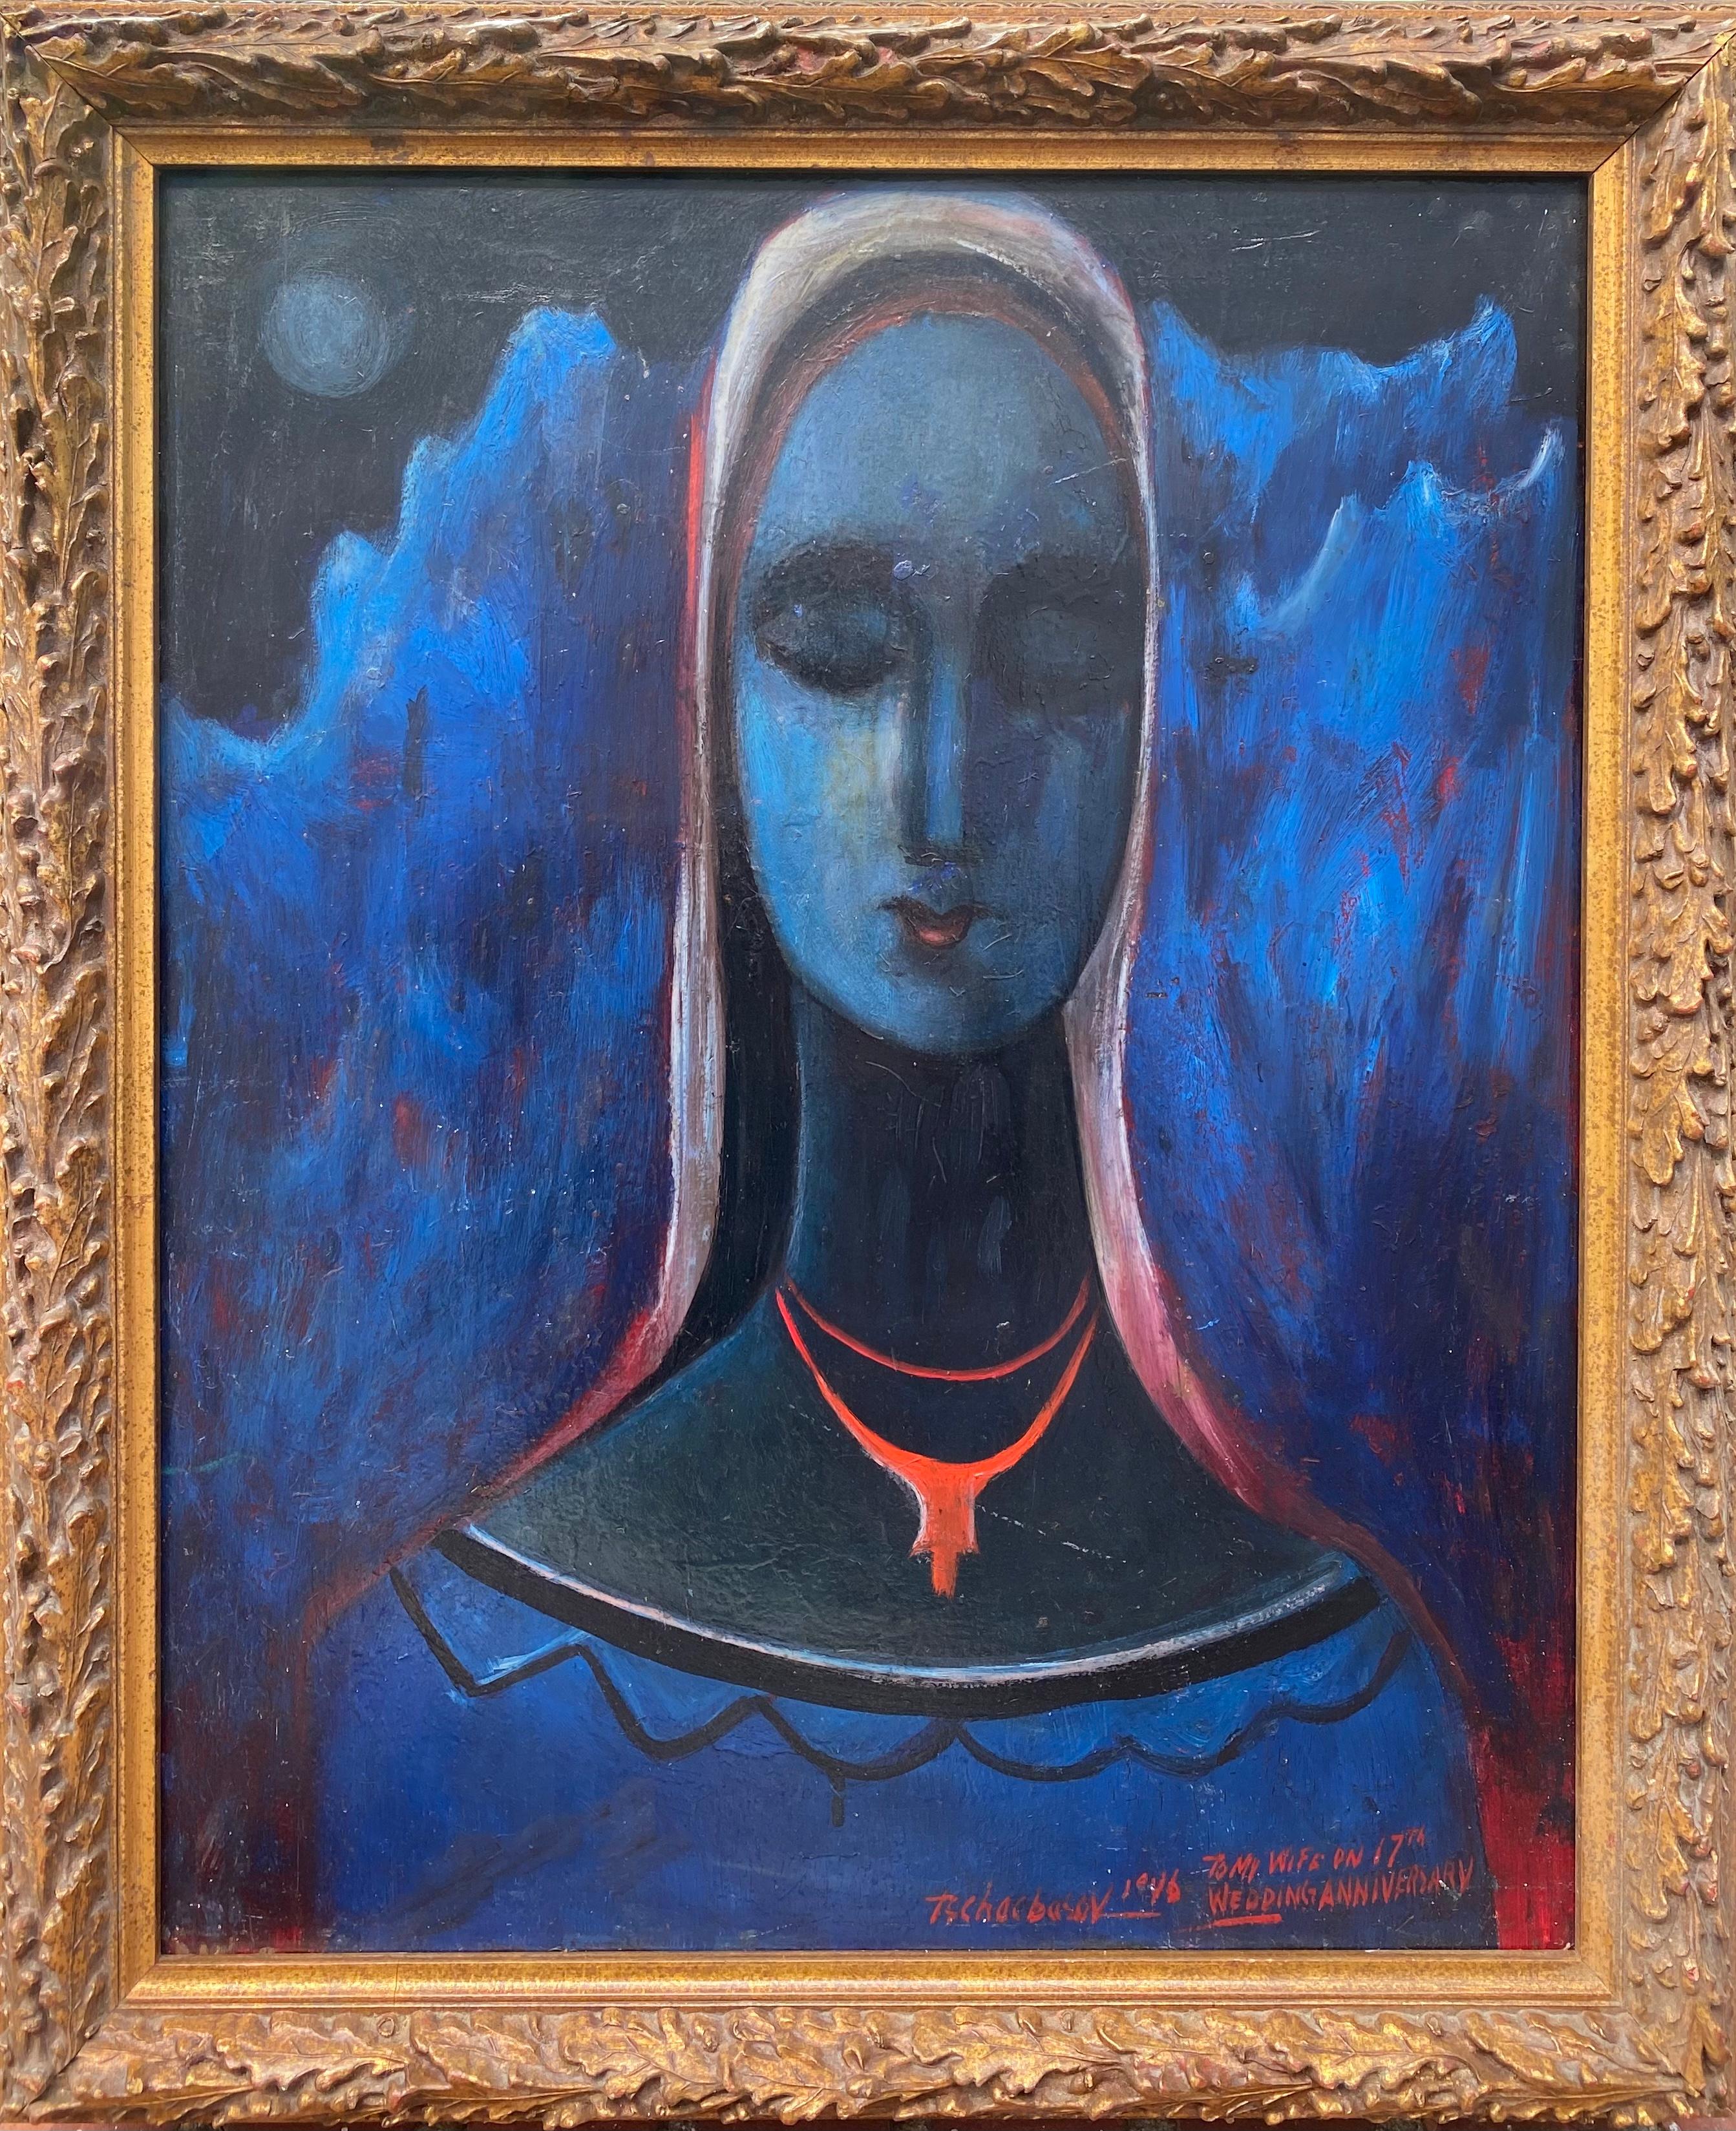 Original oil on hardboard (a type of masonite) painting by the Russian American artist, Nahum Tschacbasov.  Signed, dated 1946 along with a dedication to his wife on their 17th wedding anniversary.  Condition is very good. The back of the painting